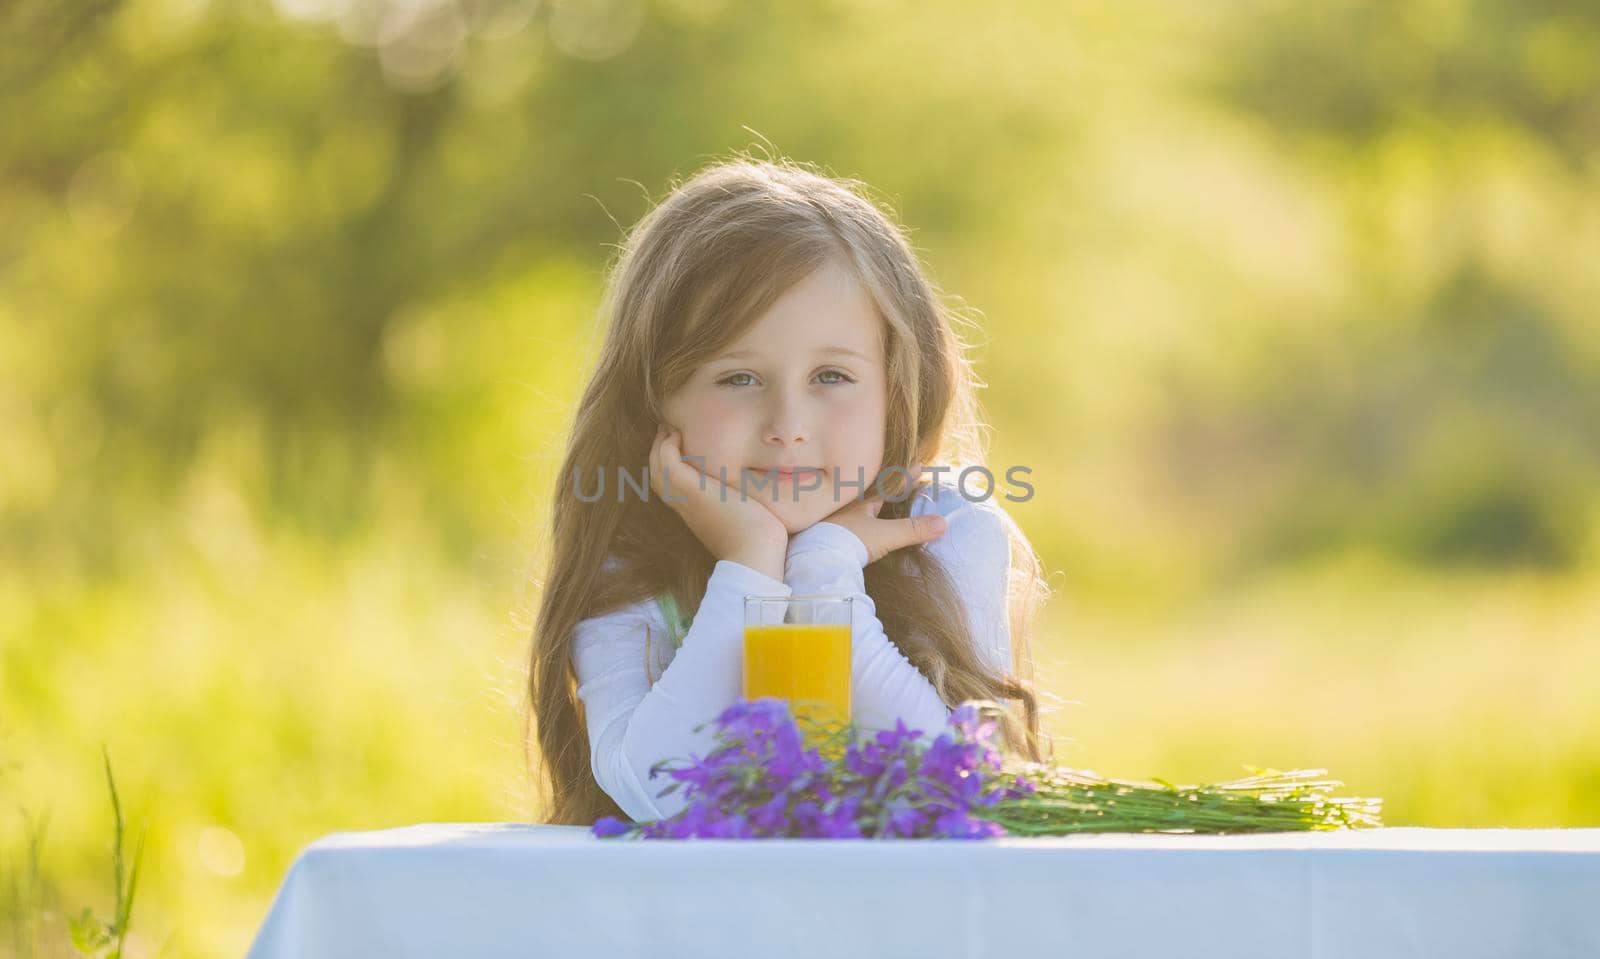 little girl in nature with a glass of orange juice